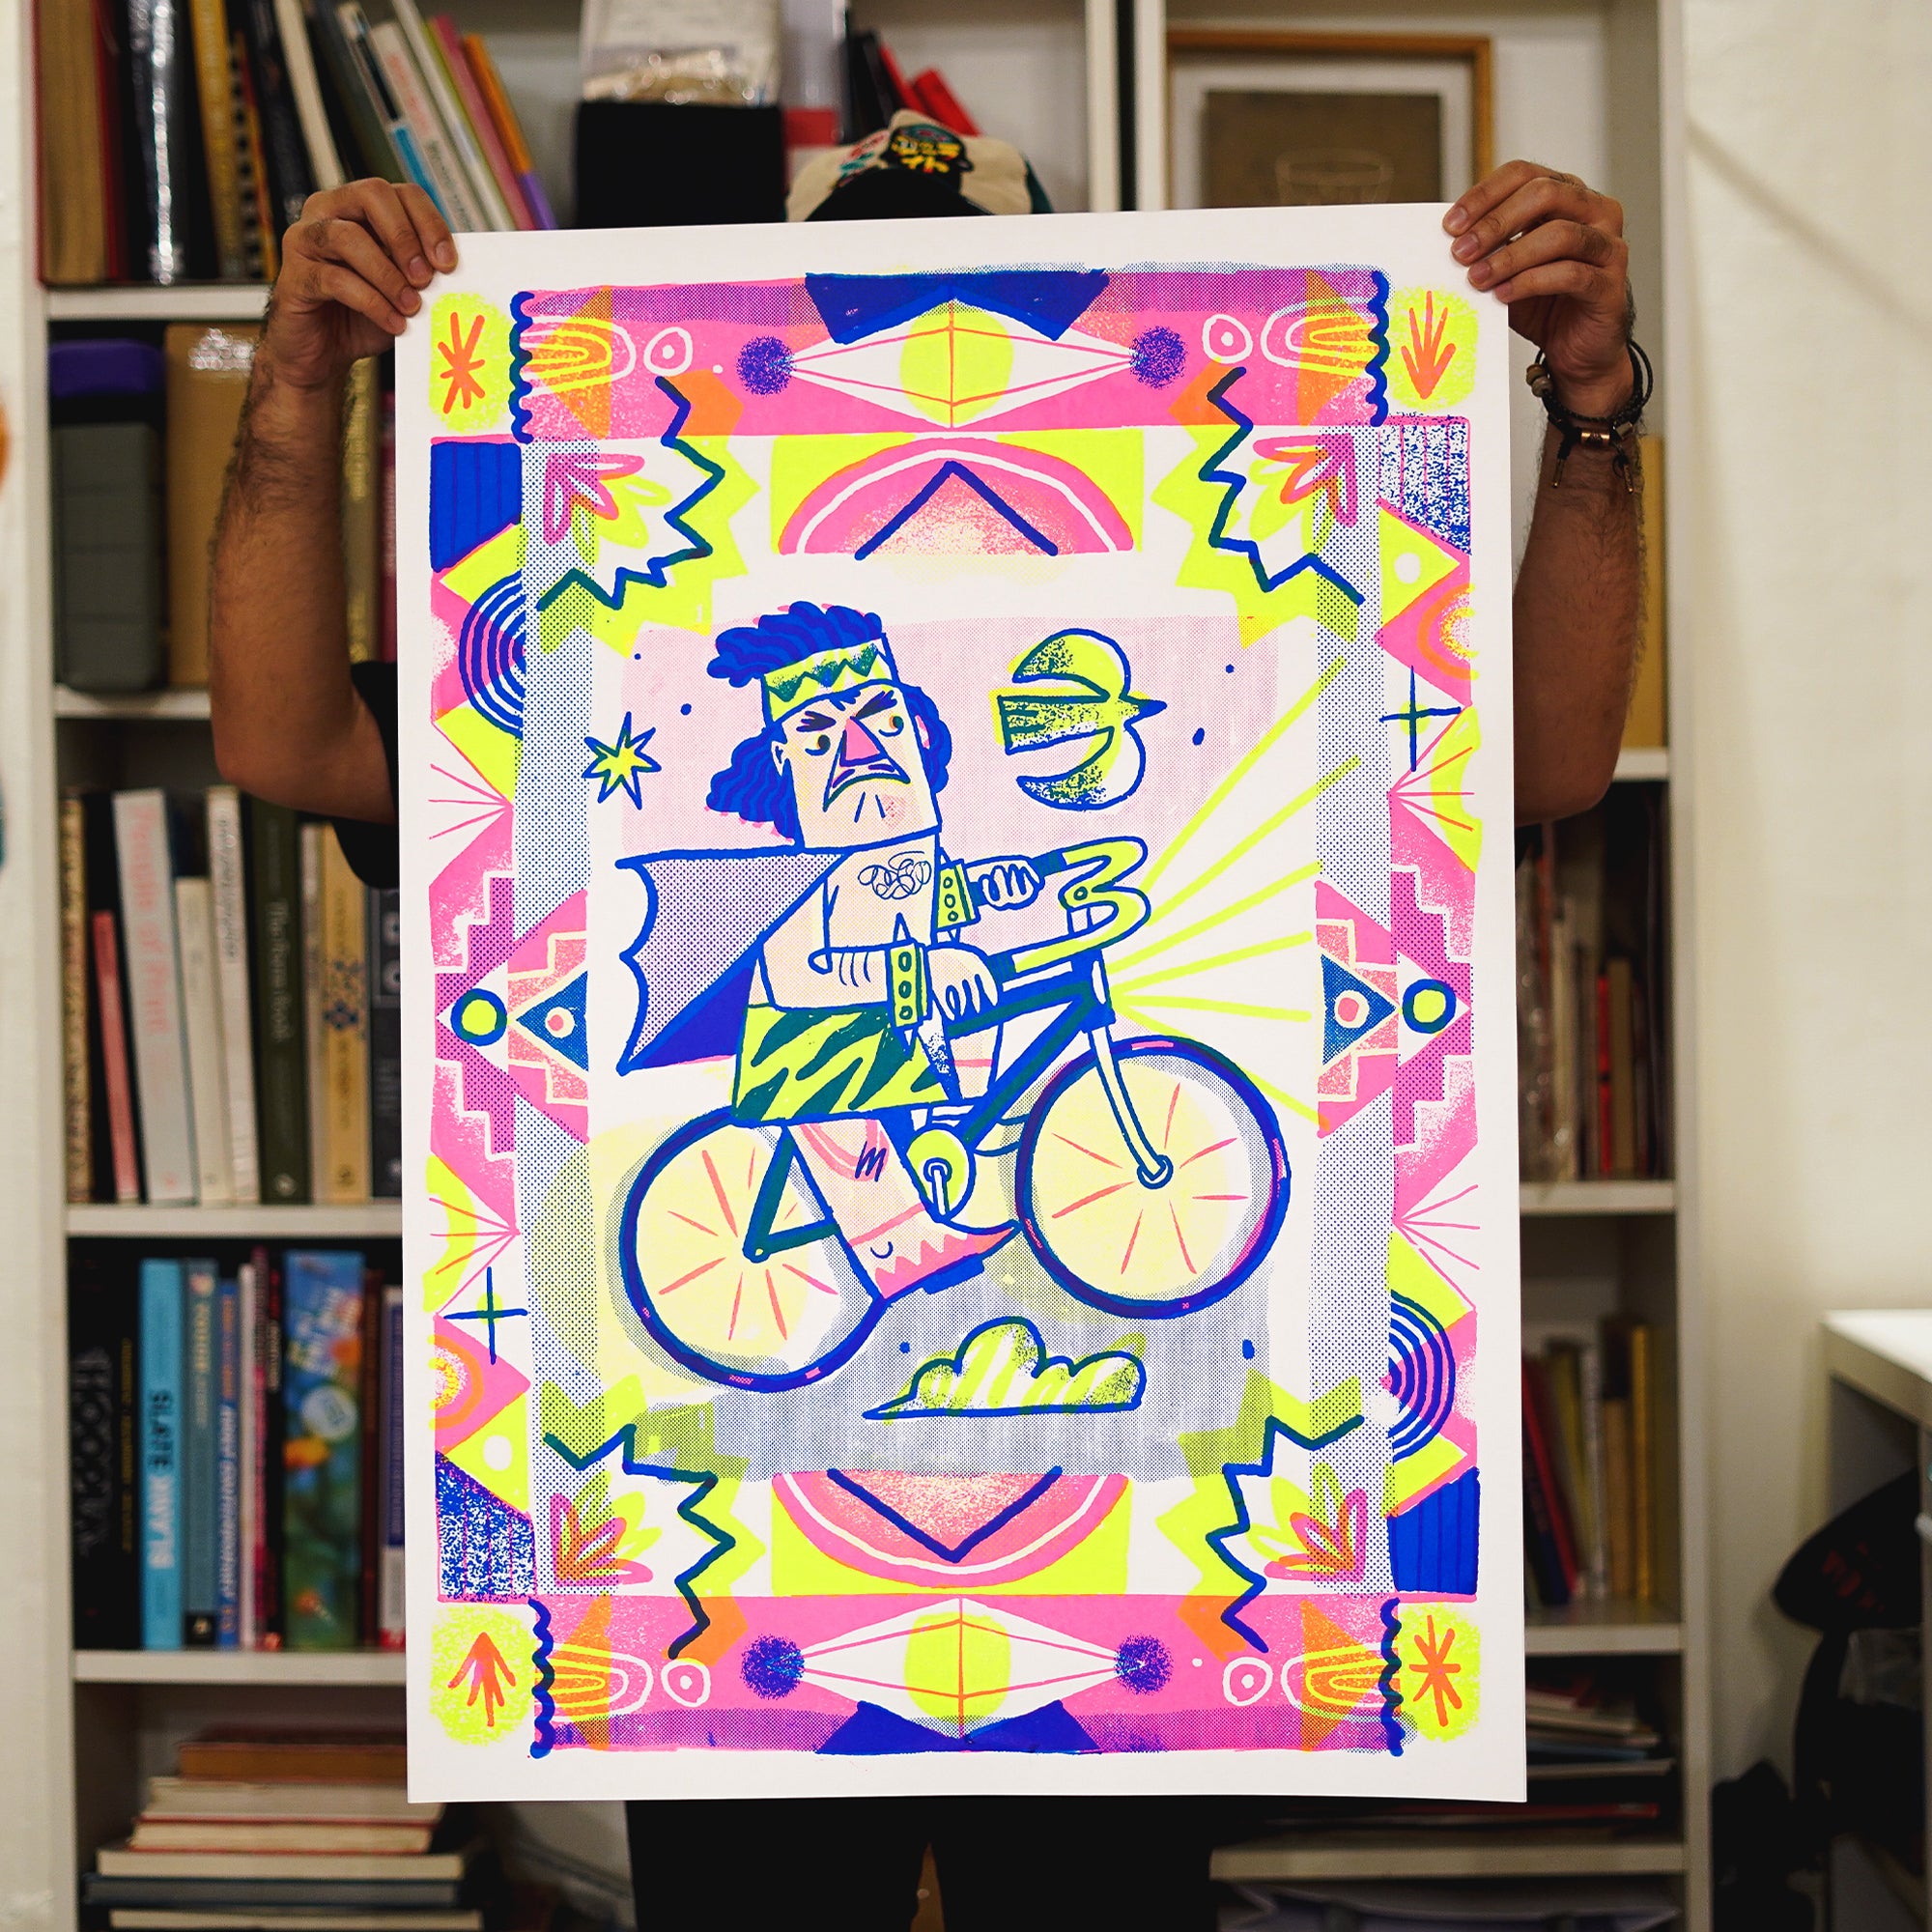 VeloPoster Original Screenprint Series - The Leap by Dicky Saputra